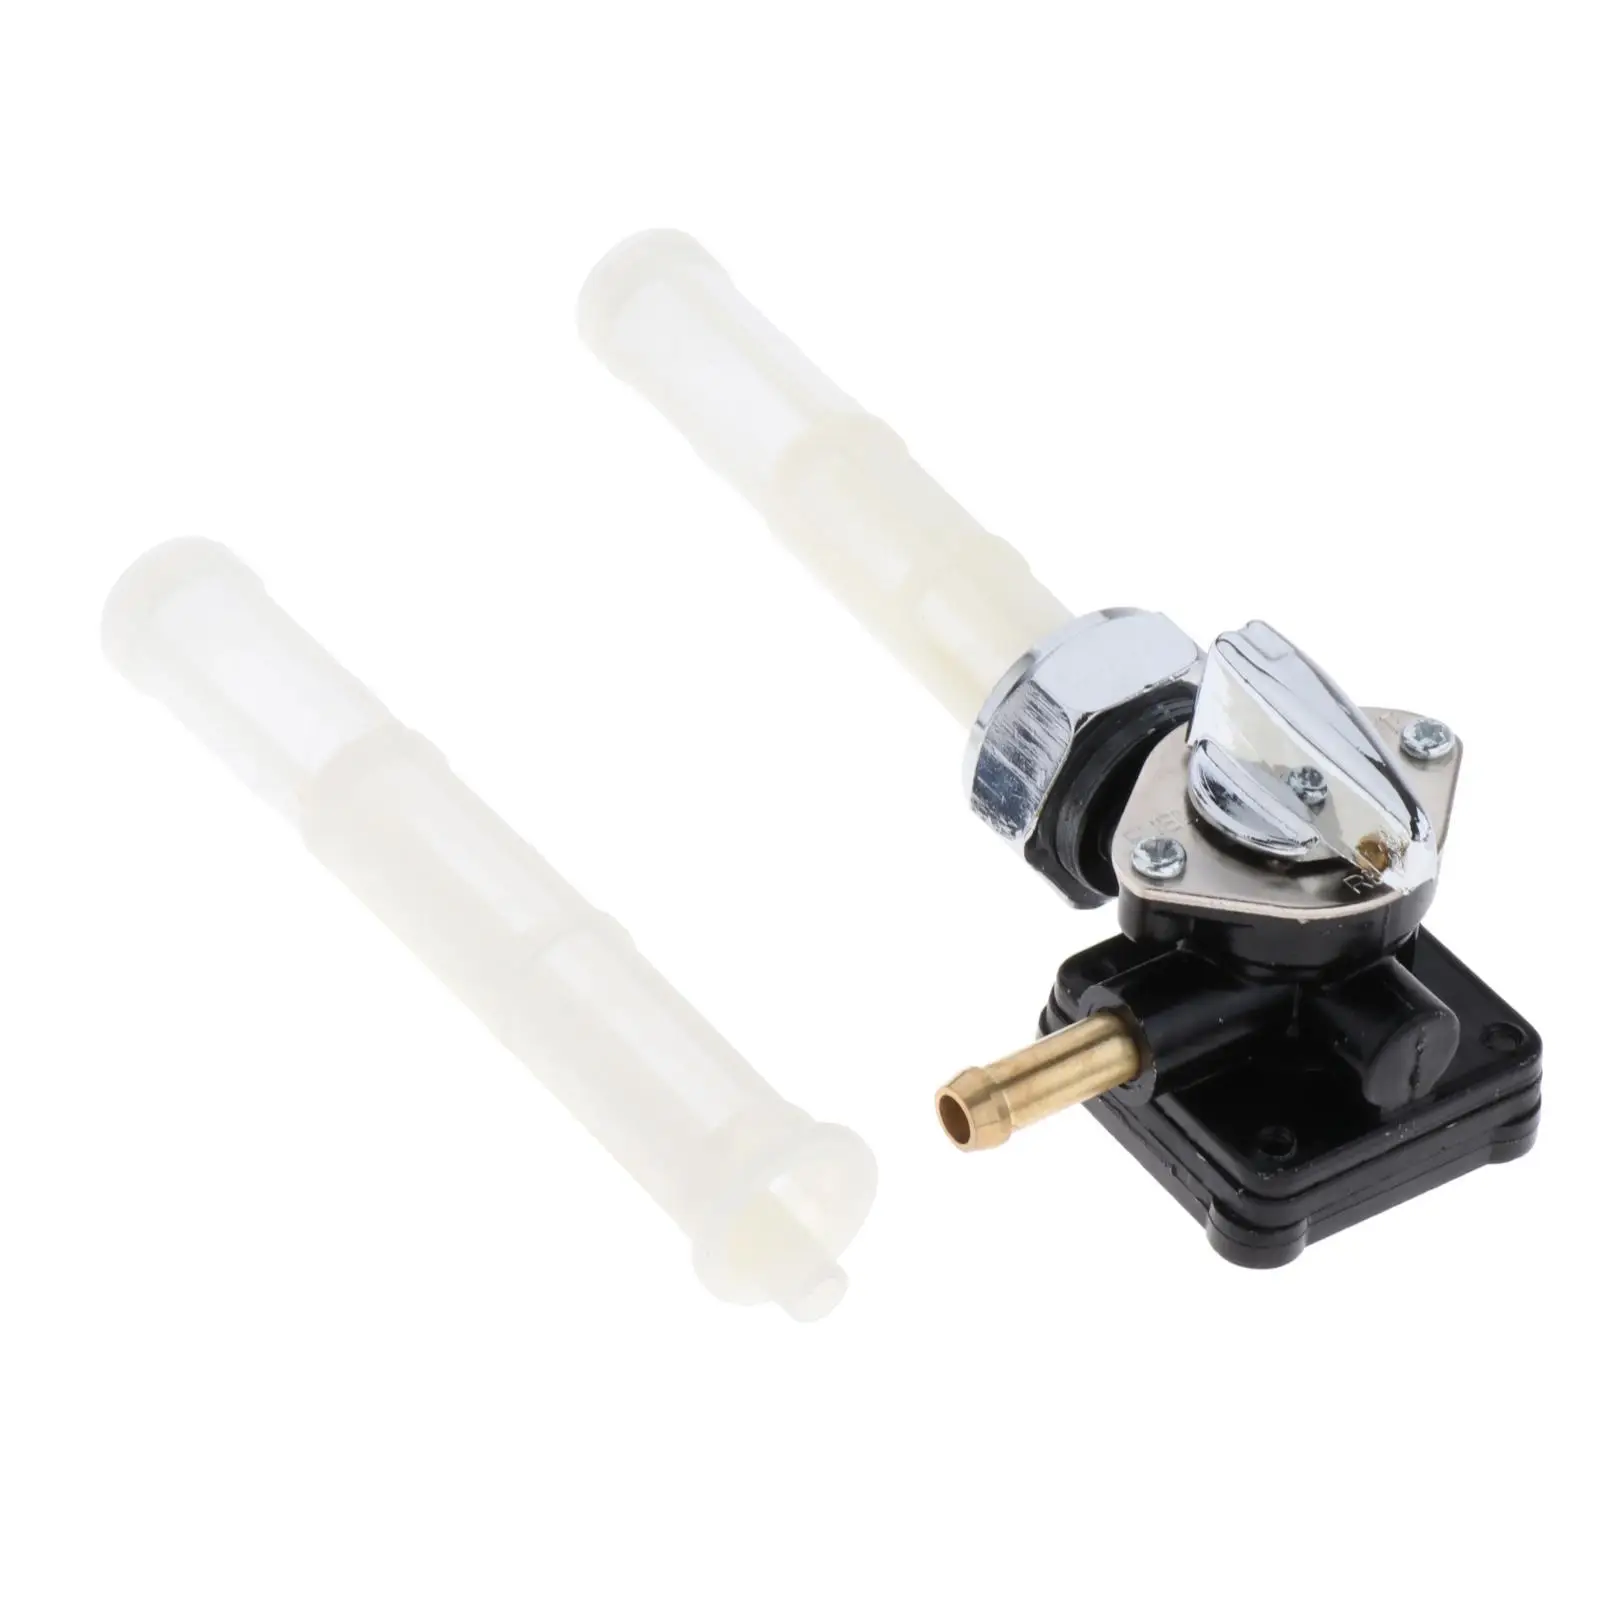 Motorcycle Fuel Valve Petcock 61338-94D for Flst Fxst Assembly Parts